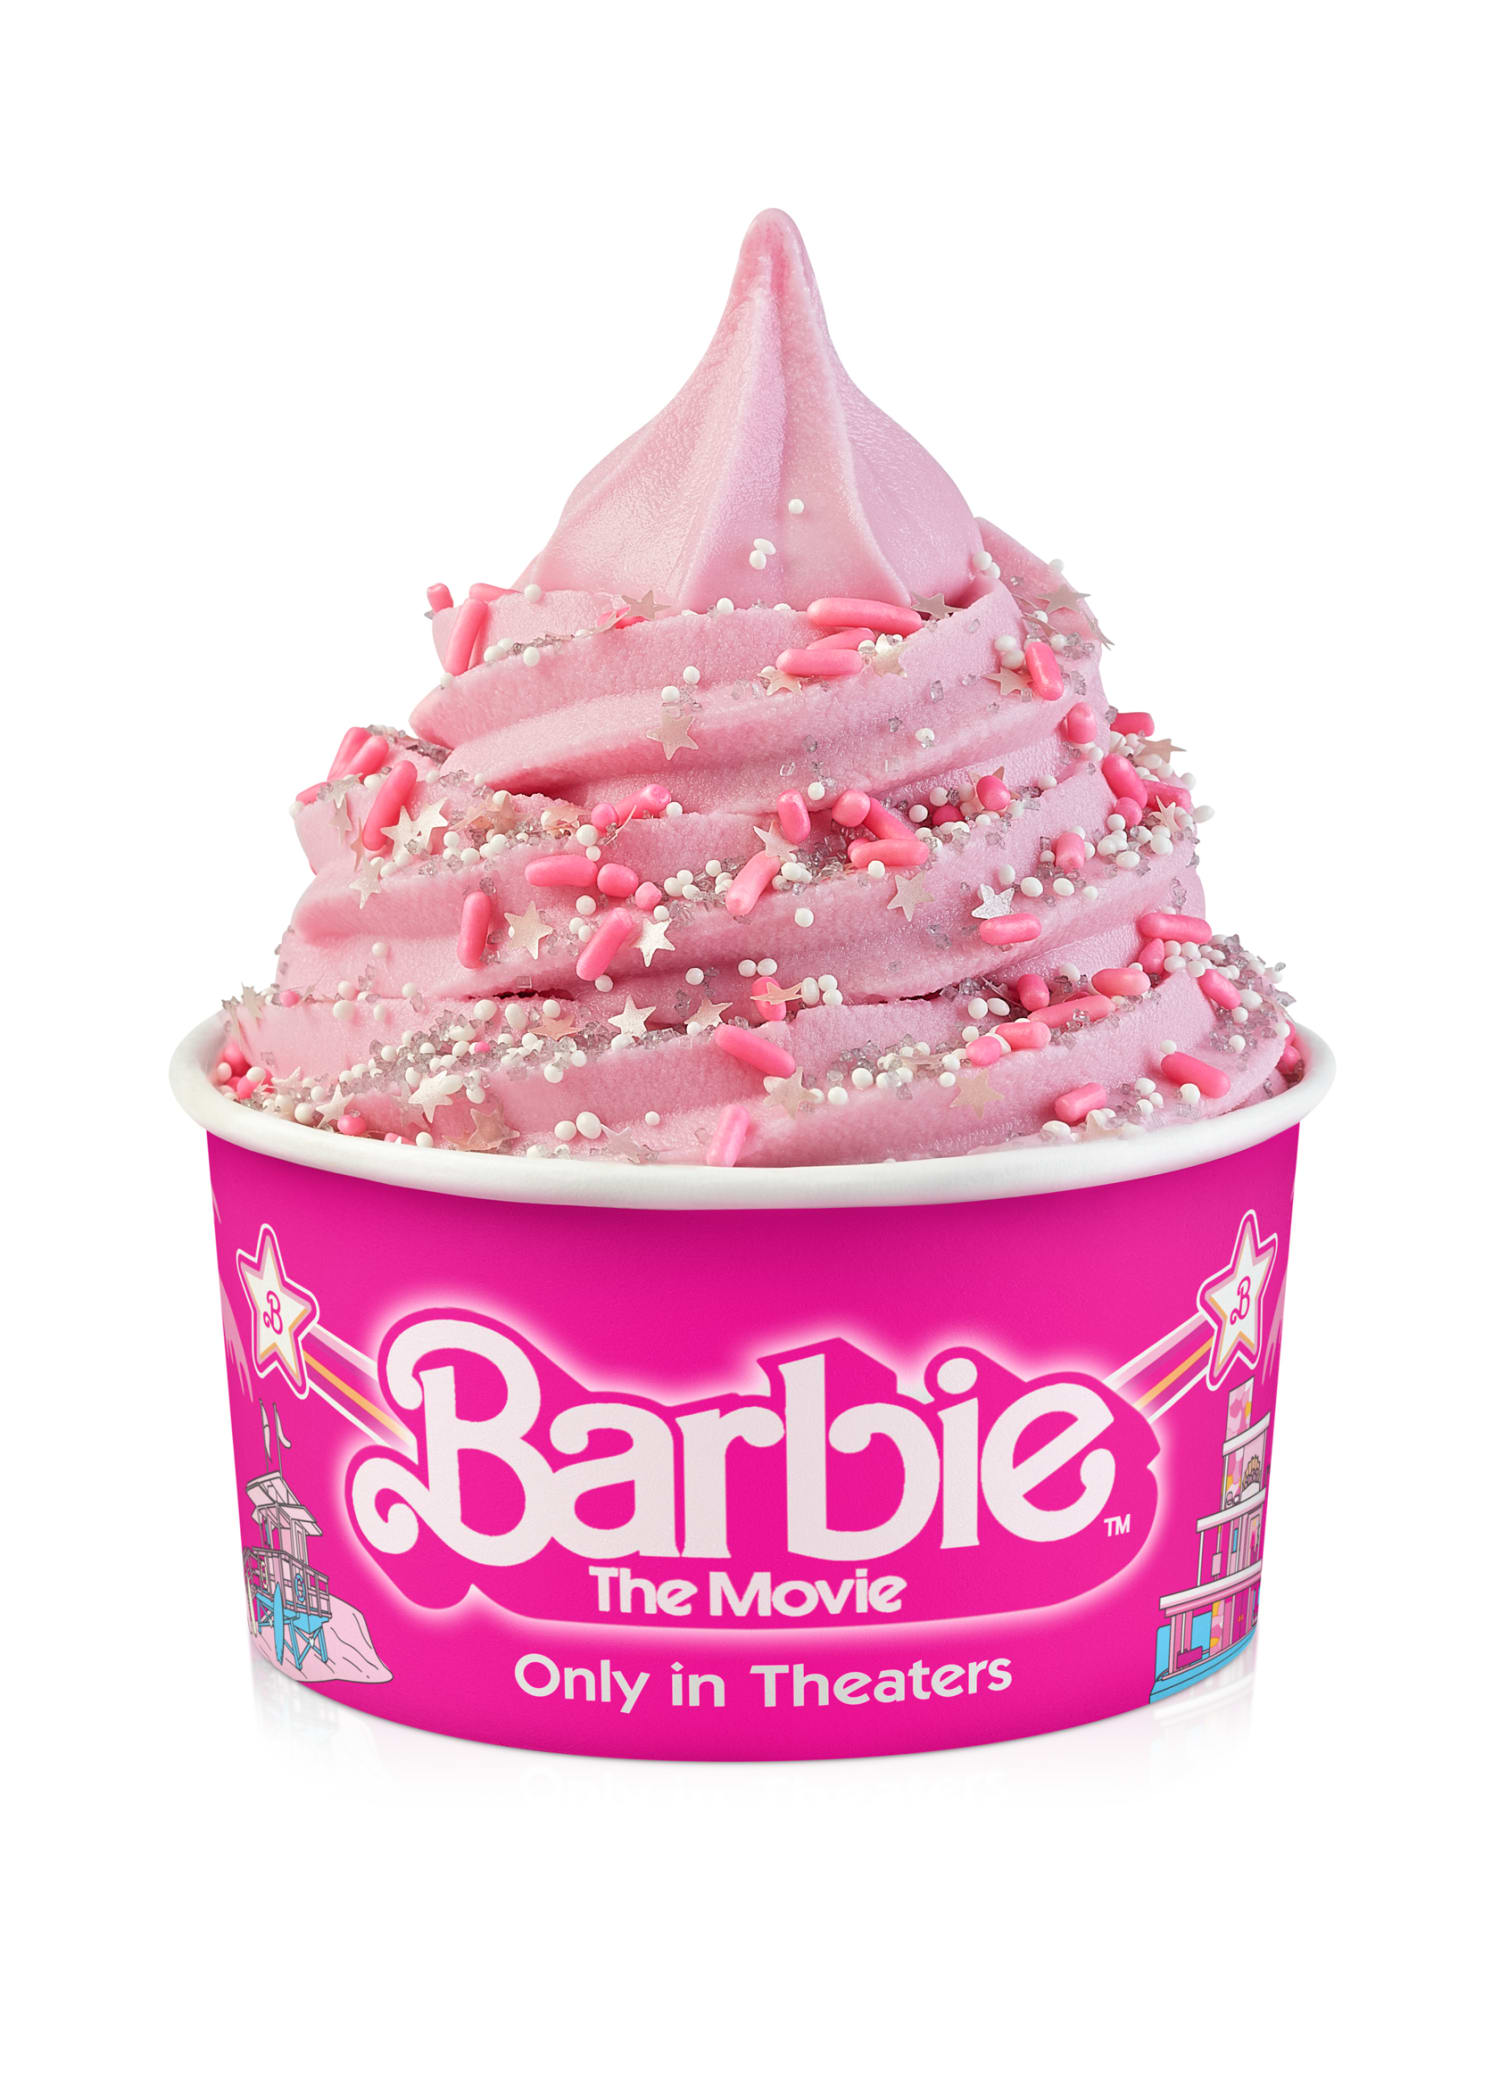 Barbie Food Collaborations Are Everywhere This Summer. We Tried Them